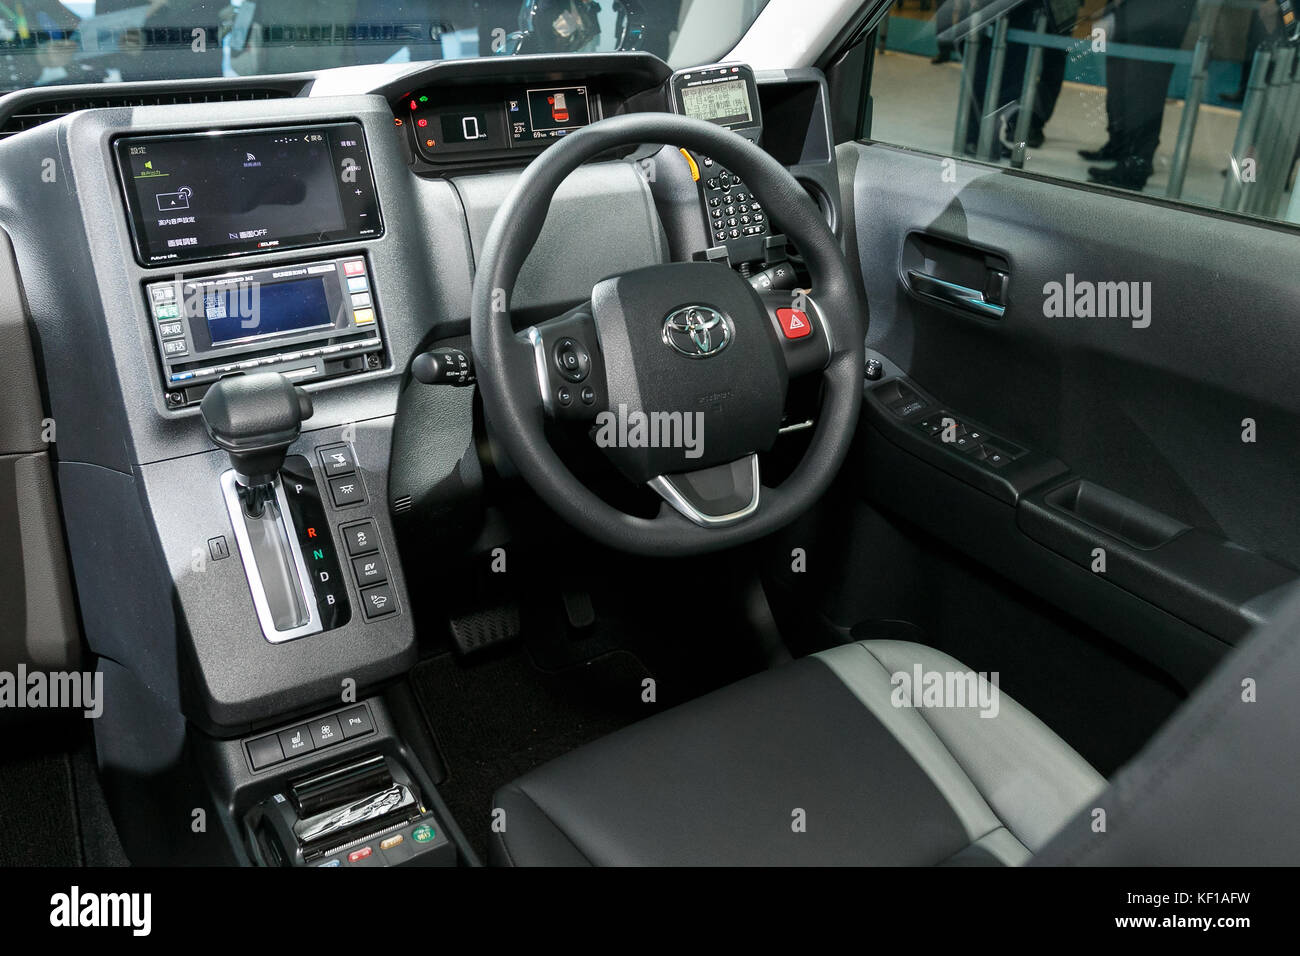 Tokyo, Japan. 25th Oct, 2017. The interior of the Toyota JPN Taxi vehicle on display during the 45th Tokyo Motor Show 2017 in Tokyo Big Sight on October 25, 2017, Tokyo, Japan. Tokyo Motor Show 2017 will showcase new mobility solutions from over 153 Japanese and overseas automakers. The exhibition is open to the public from October 26 to November 5. Credit: Rodrigo Reyes Marin/AFLO/Alamy Live News Stock Photo